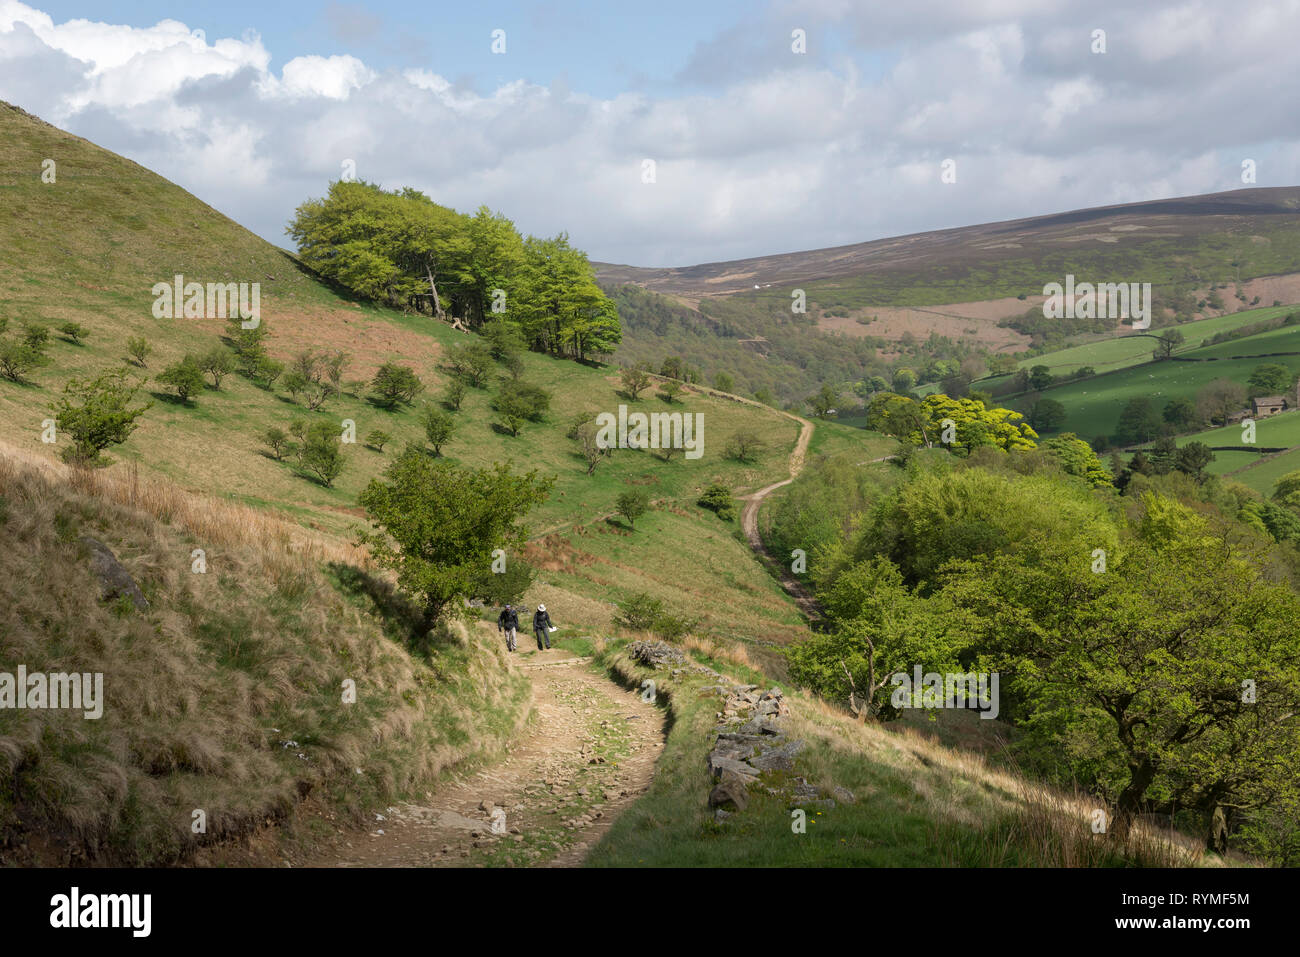 Couple walking on a path in the hills near Hayfield in the Peak District national park, Derbyshire, England. Stock Photo